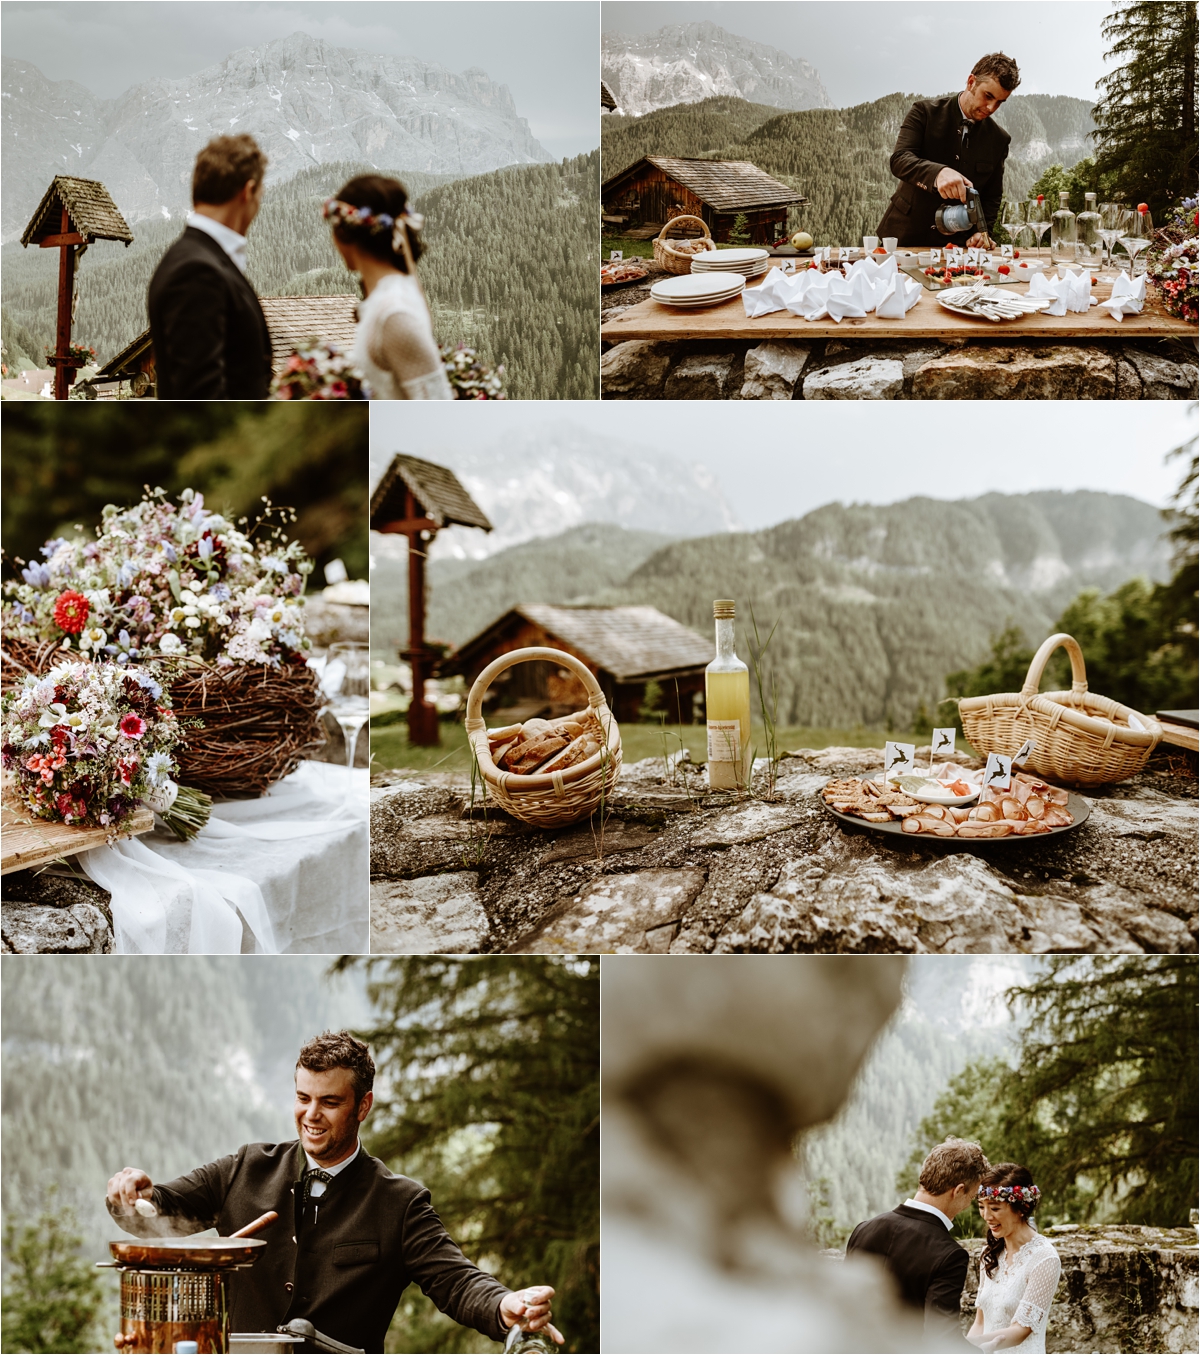 A post-elopement picnic in the Dolomites. Photo by Wild Connections Photography